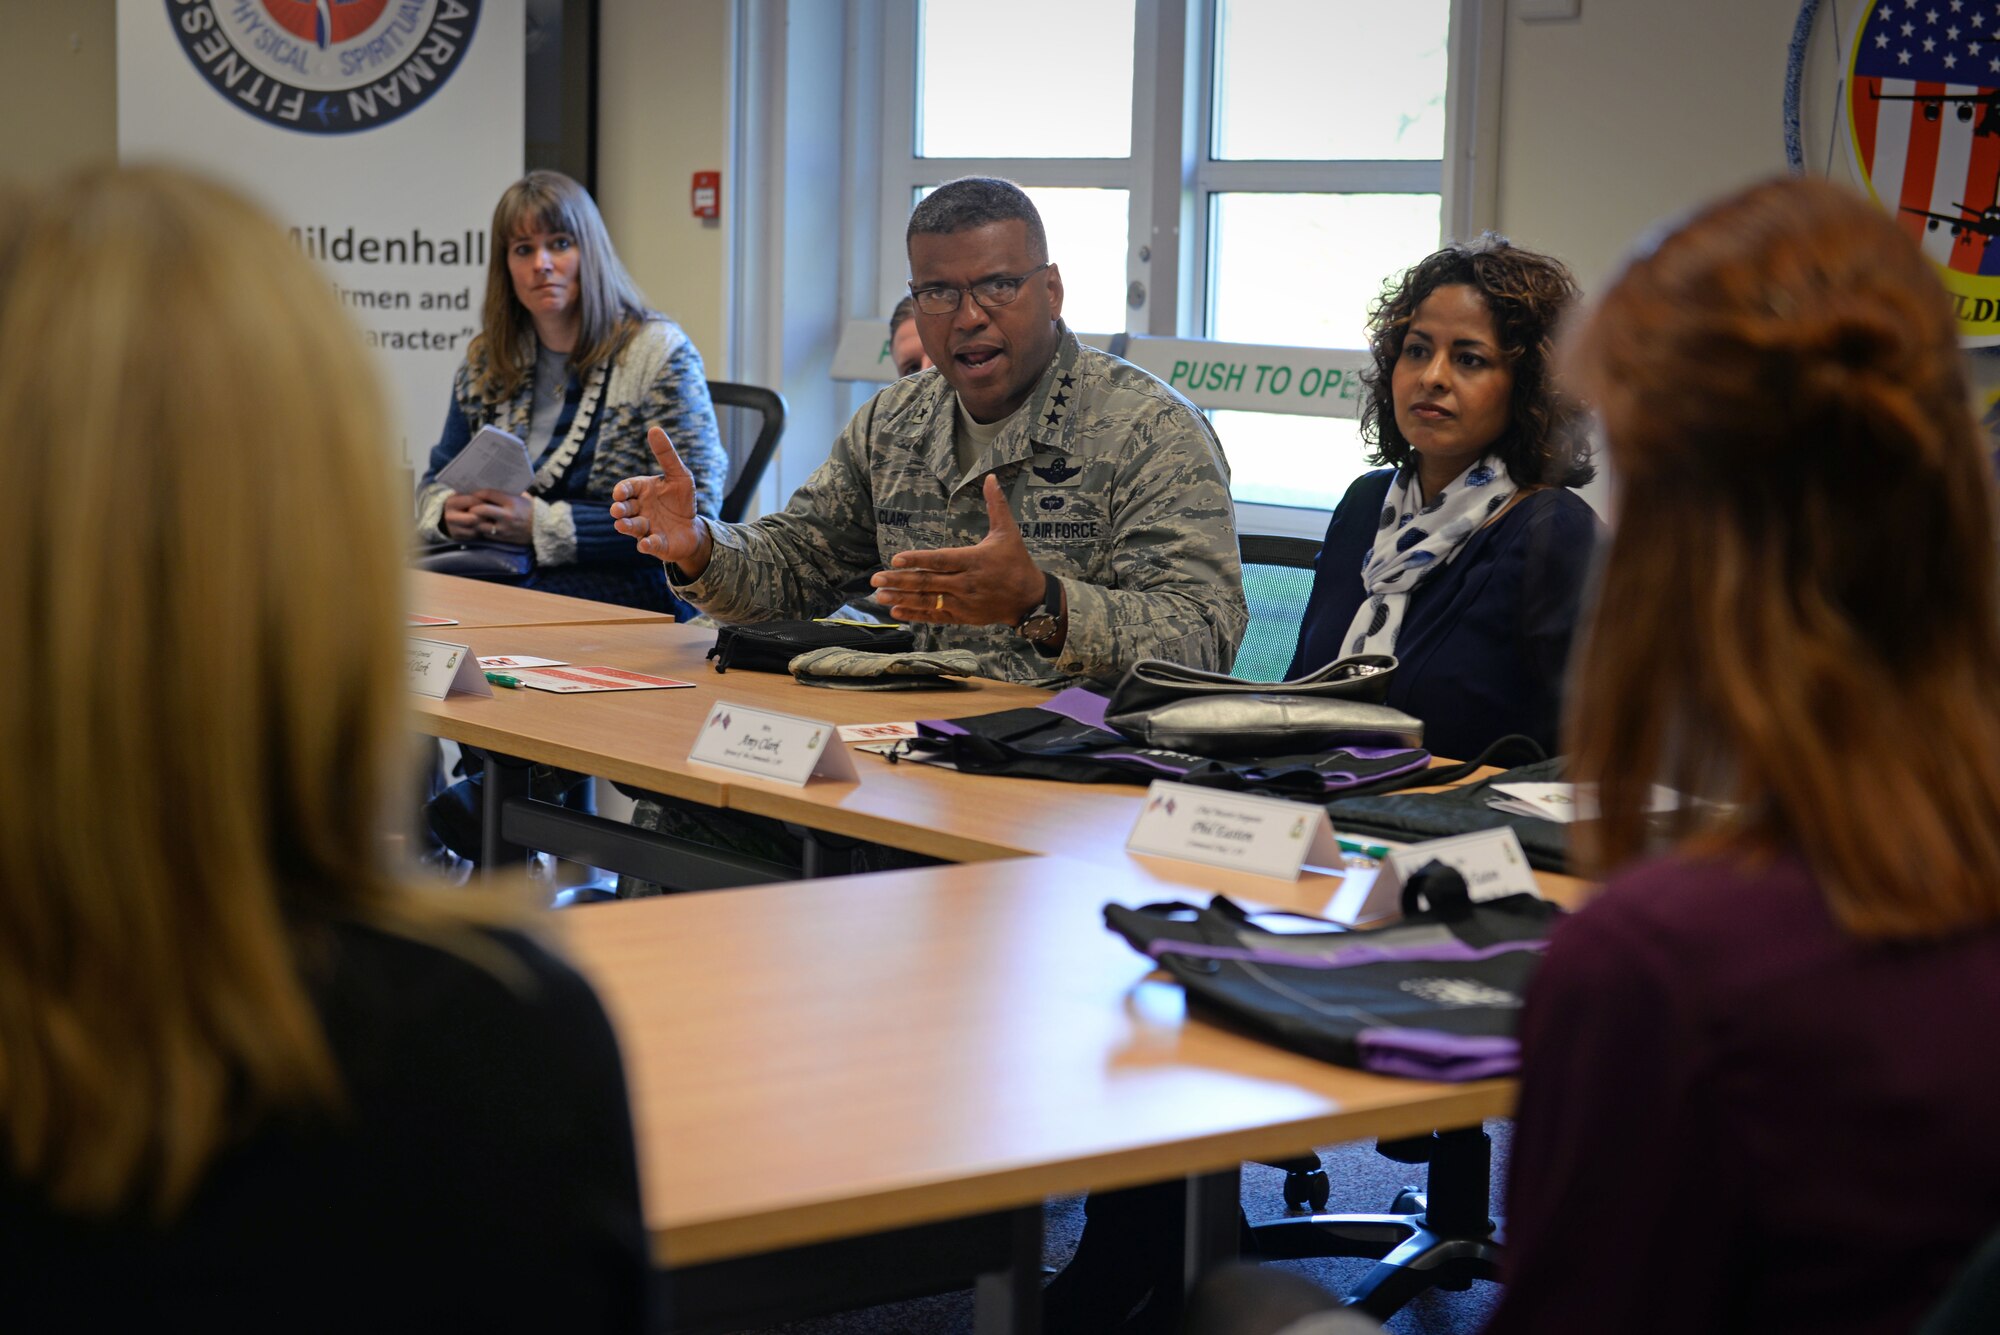 U.S. Air Force Lt. Gen. Richard Clark, 3rd Air Force commander, speaks with spouses about the RAF Mildenhall Spouses Resiliency Initiative Jan. 5, 2016, on RAF Mildenhall, England. The RAF Mildenhall Spouse Resilience Team was created to give military spouses the same opportunity as military members to embrace holistic fitness and resilience aids. (U.S. Air Force photo by Senior Airman Christine Halan)